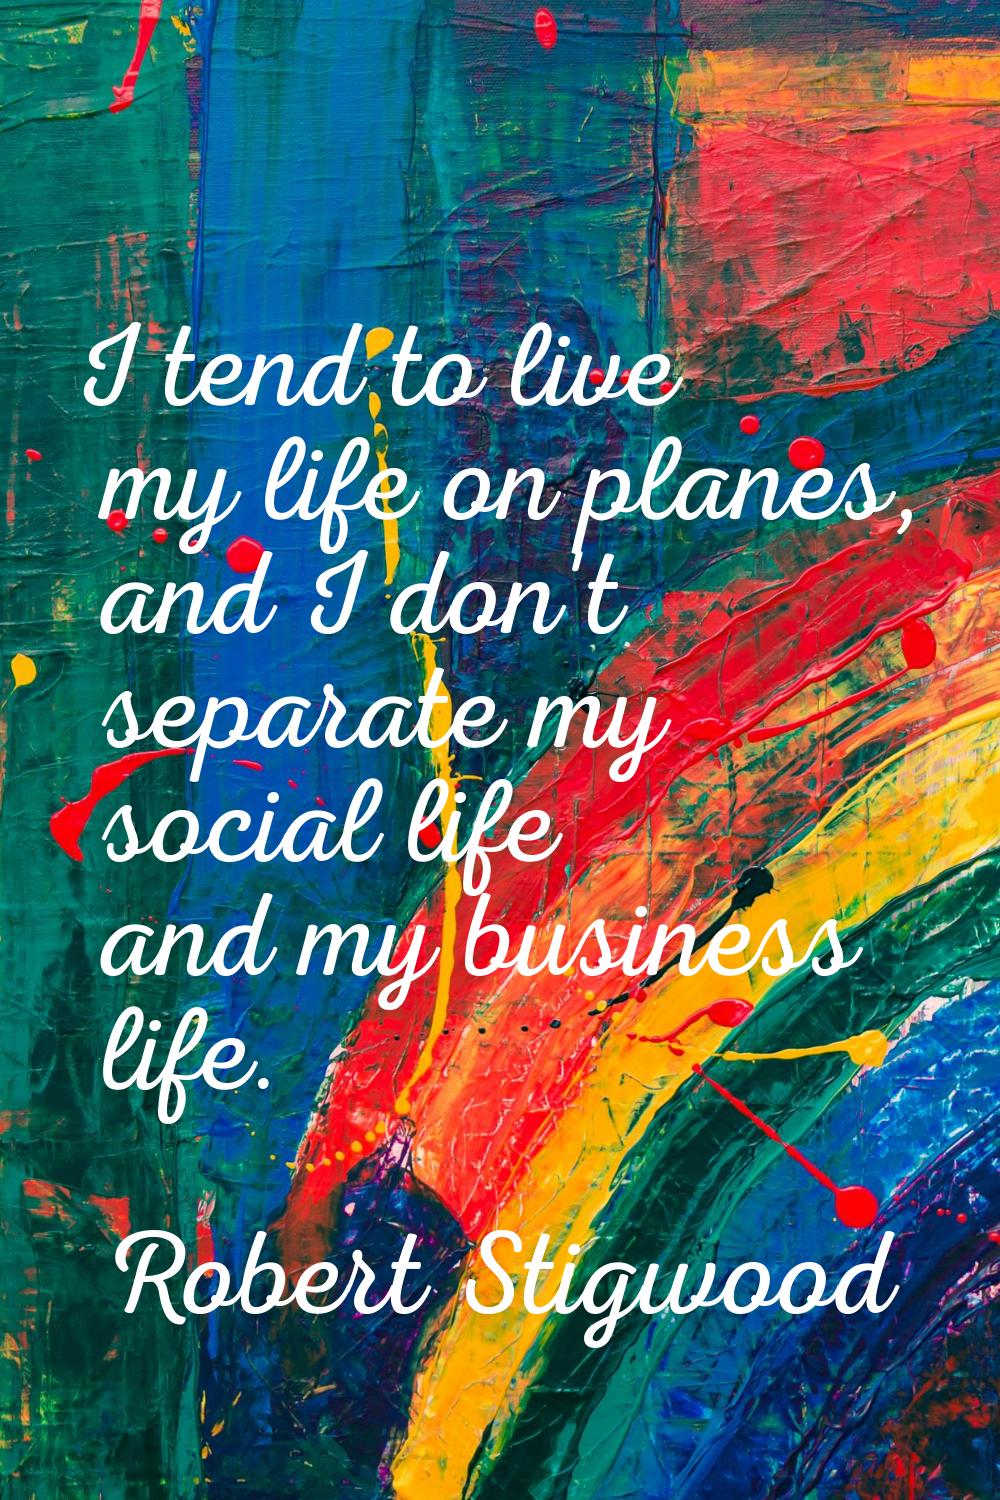 I tend to live my life on planes, and I don't separate my social life and my business life.